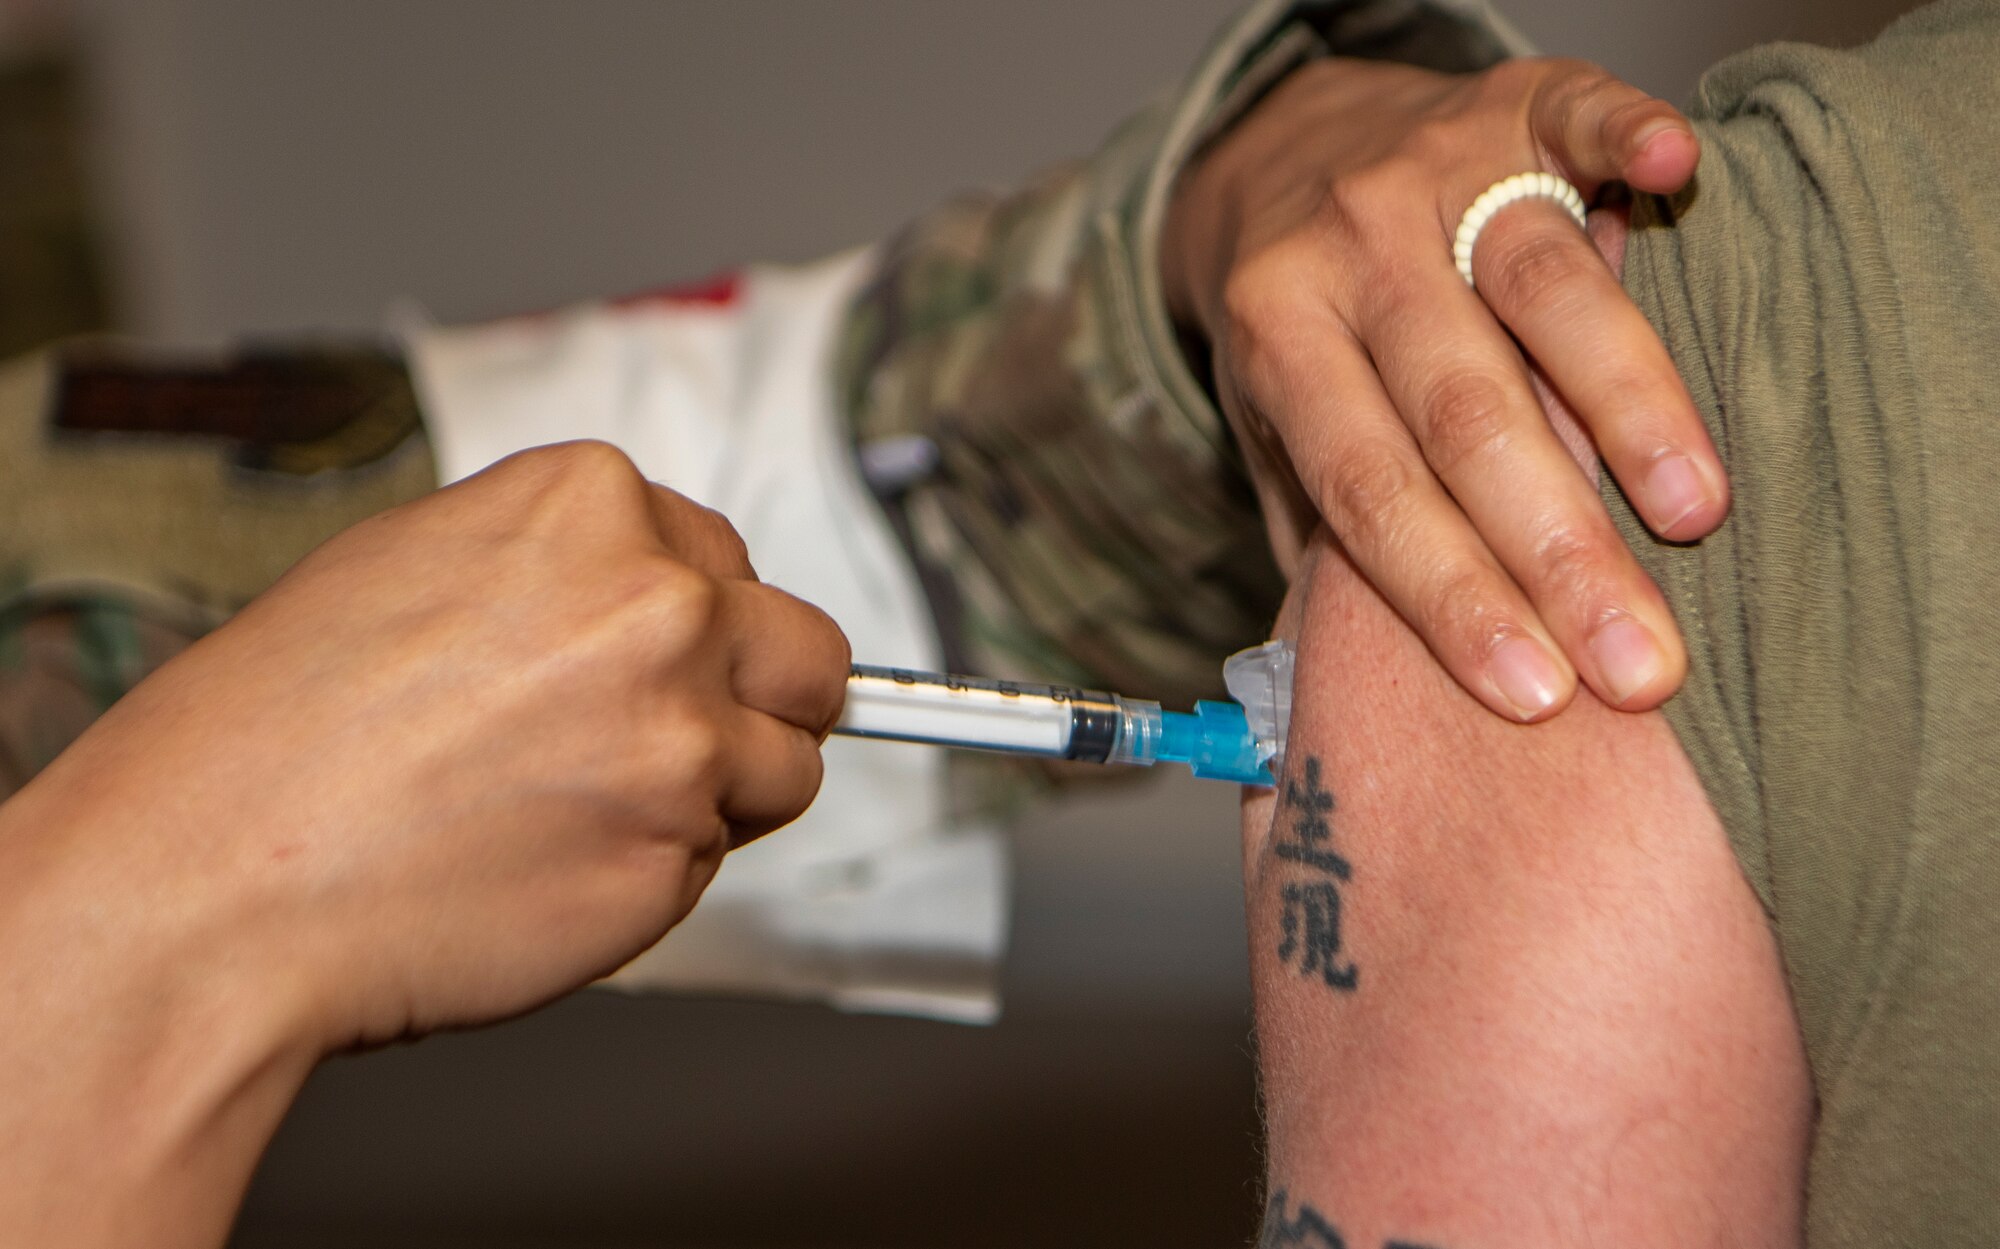 Airman receives a shot in the arm.